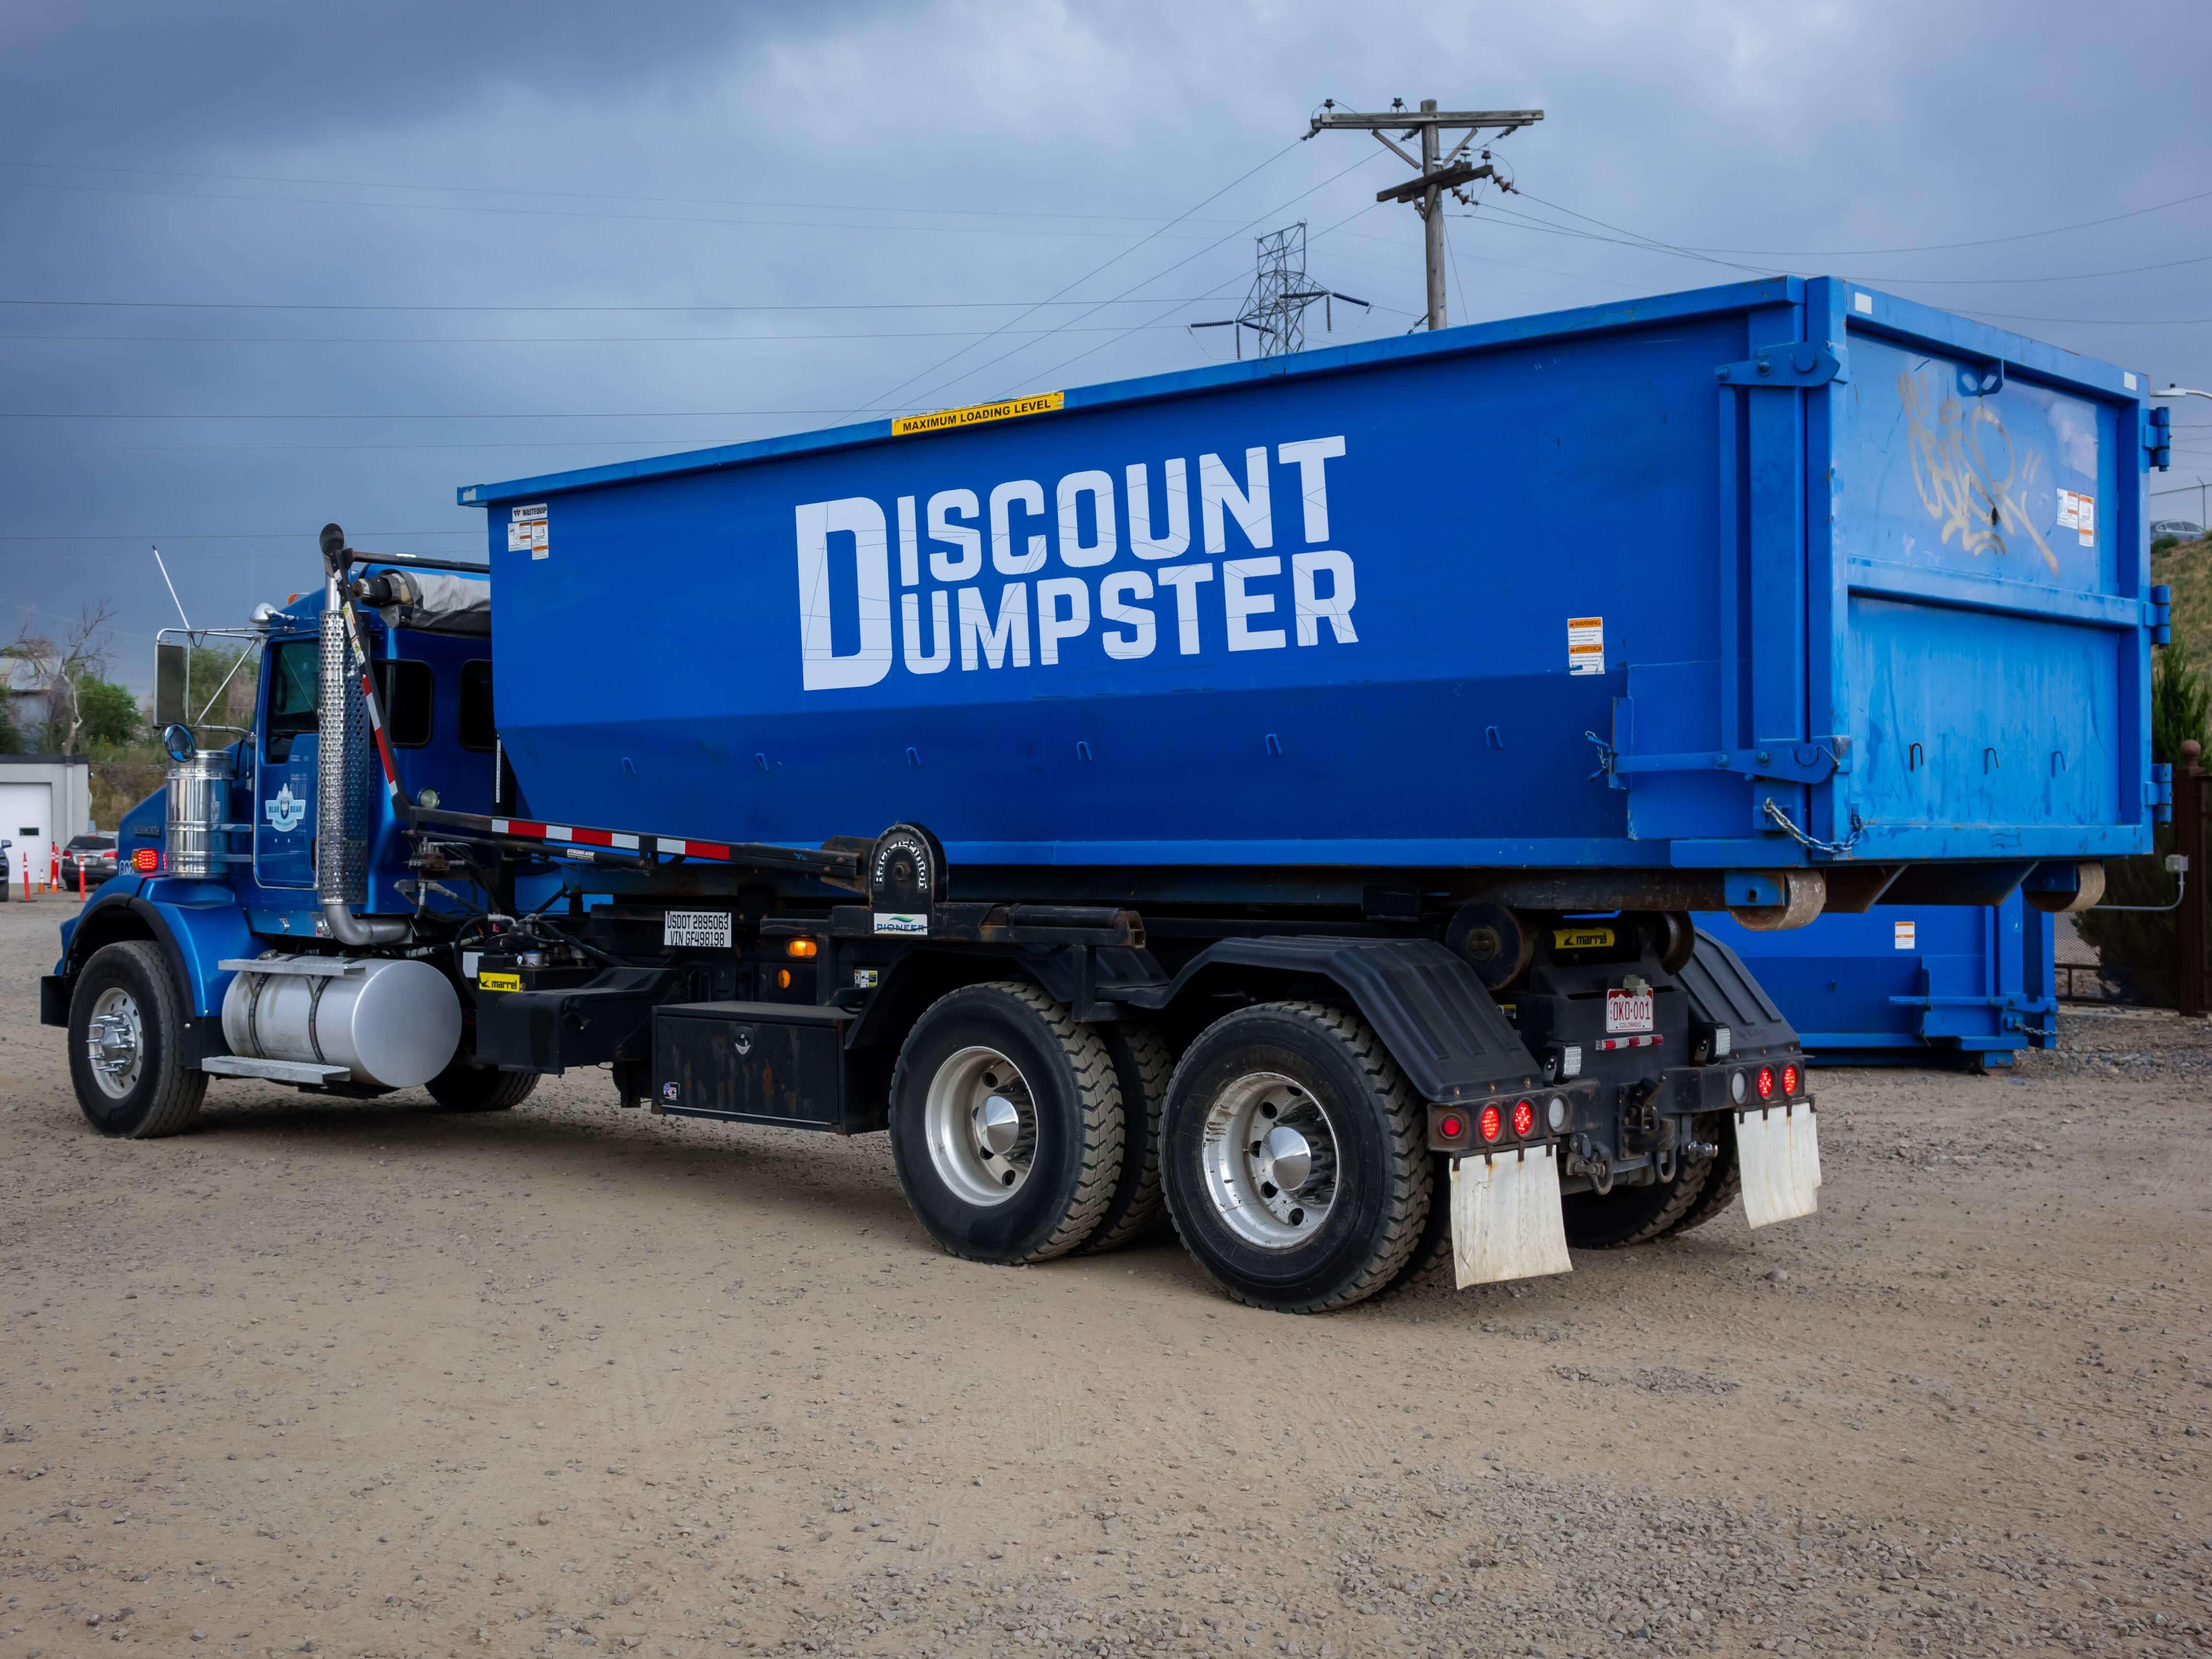 Discount dumpster has dumspters of all sizes for waste removal in chicago il